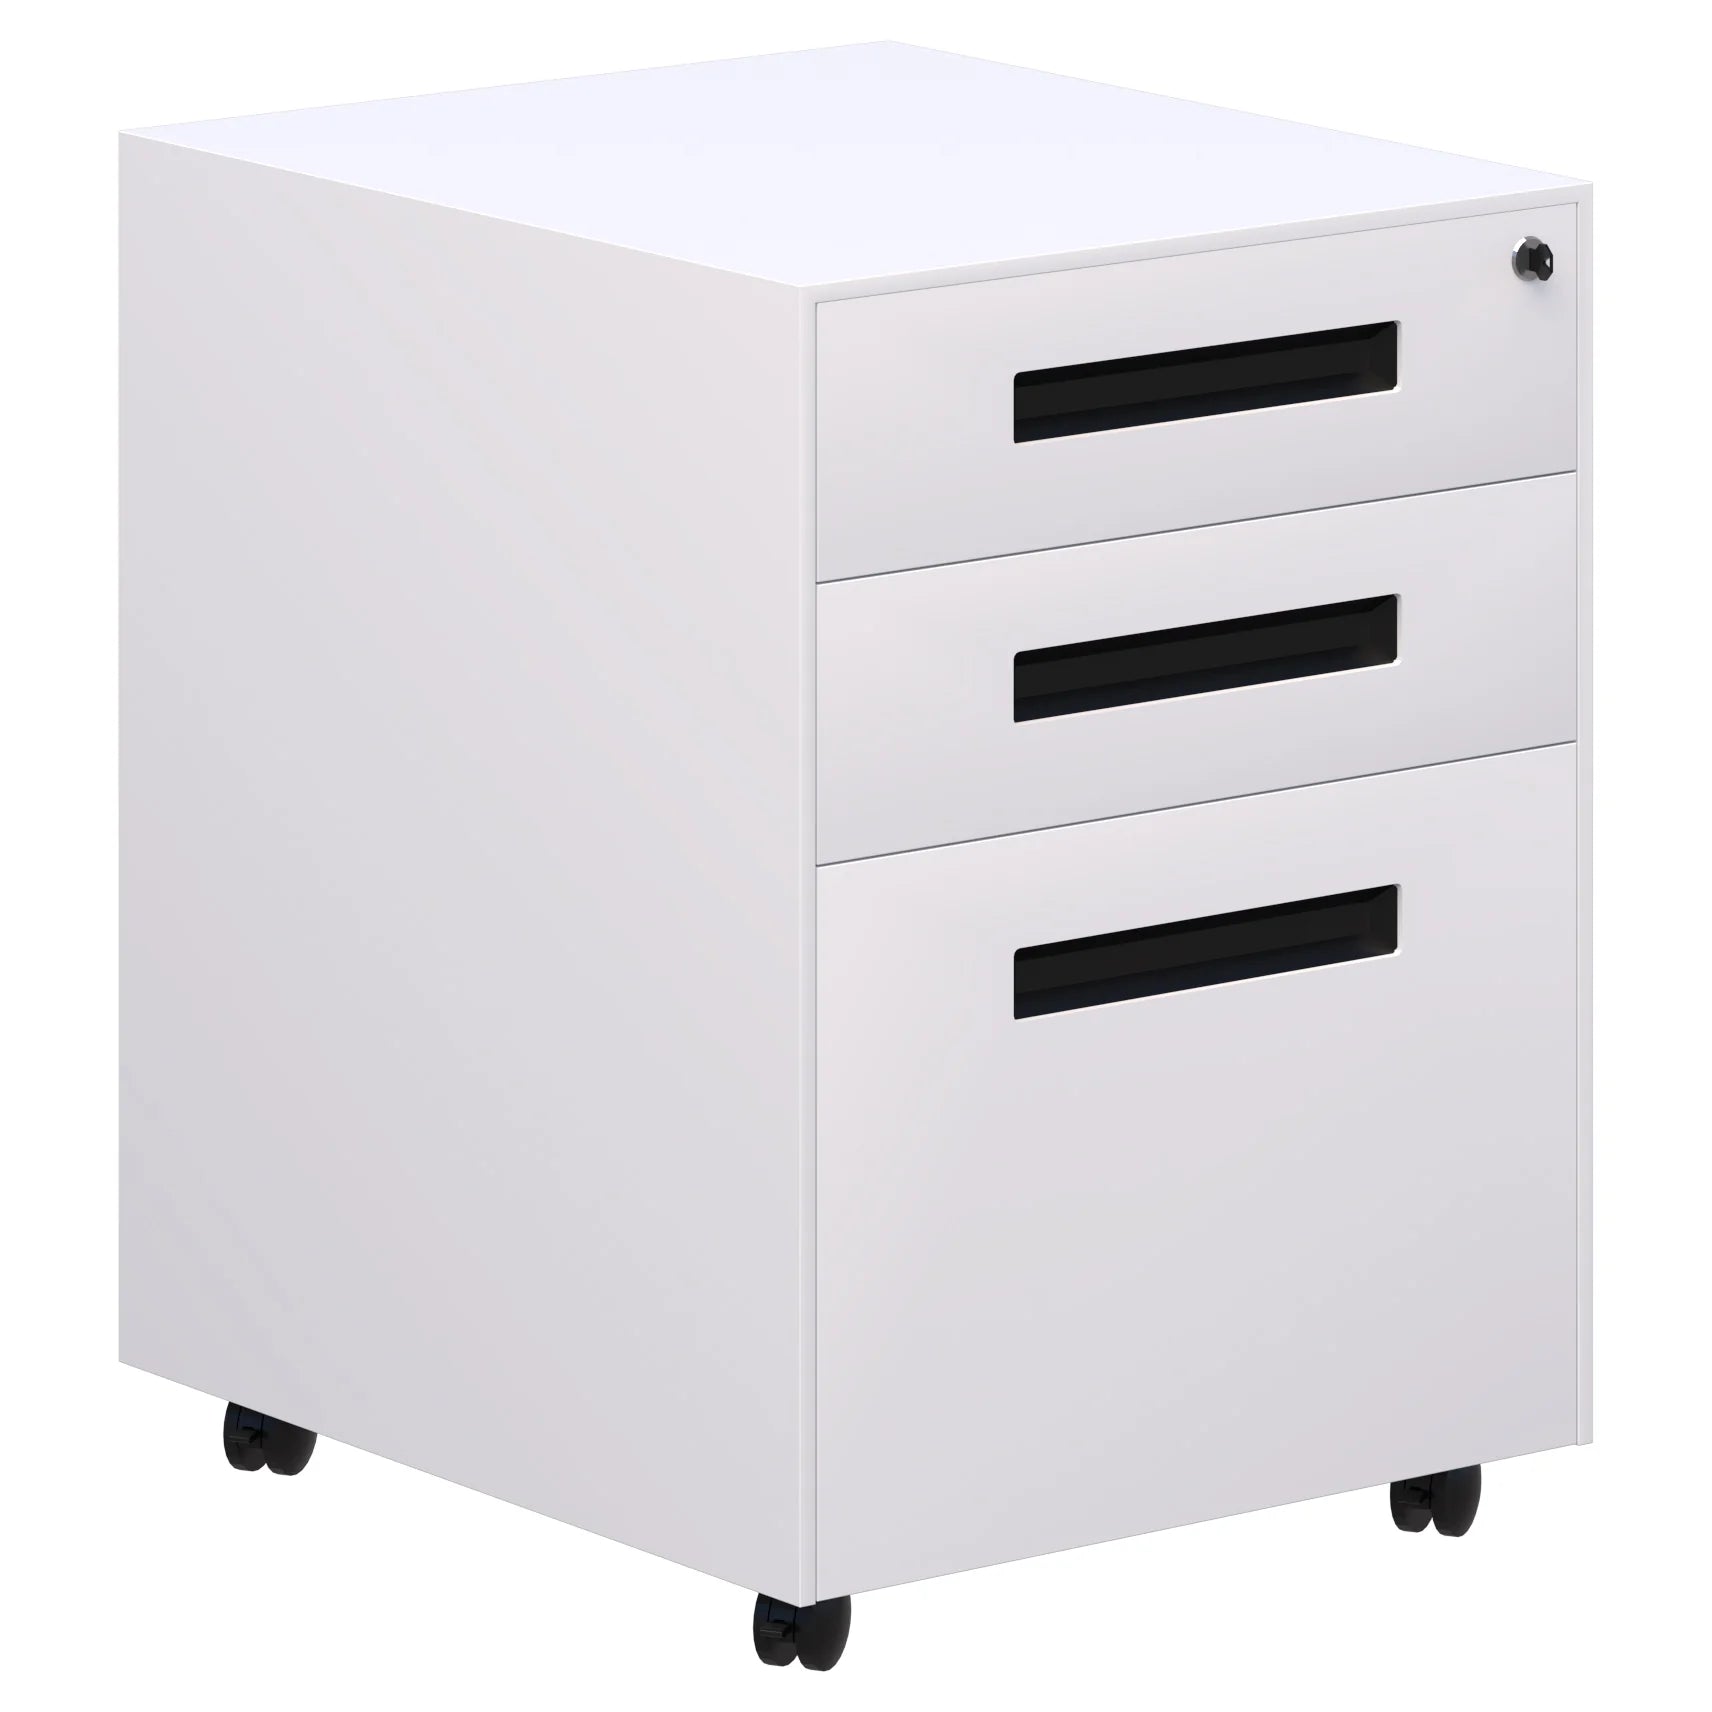 Lockable Spectrum metal mobile with two stationery drawers and 1 file draw in white with black handles.